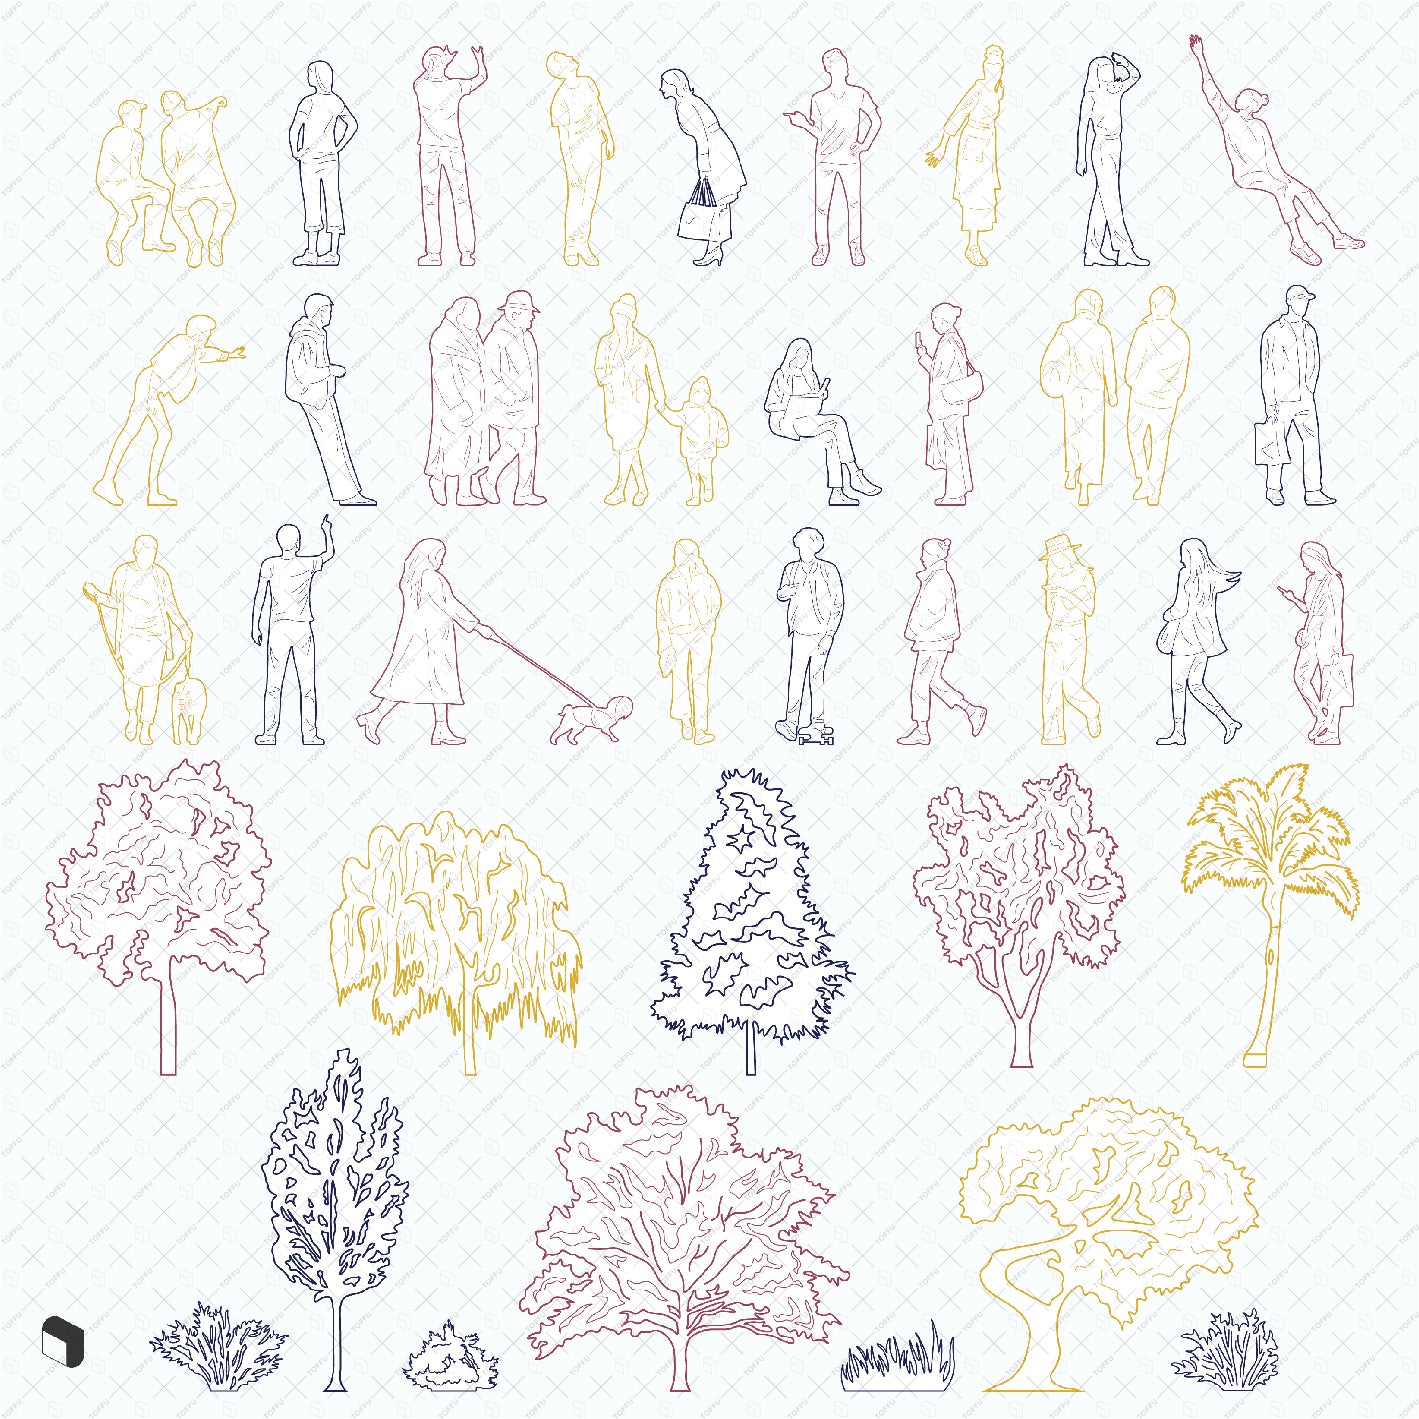 Cad Outlined People & Trees DWG | Toffu Co